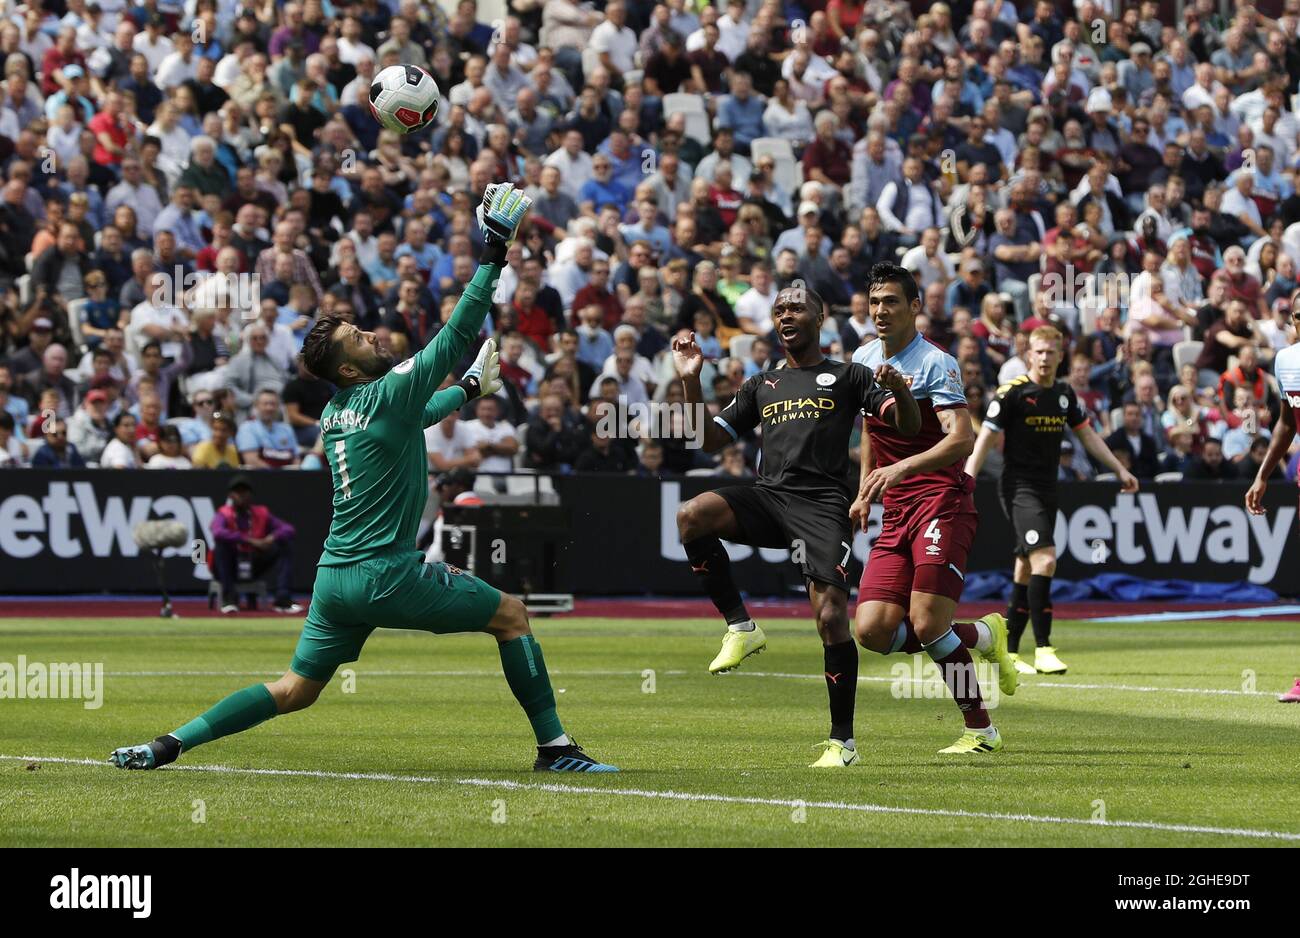 Raheem Sterling of Manchester City lobs the ball over Lukasz Fabianski of West Ham United for the third goal during the Premier League match at the London Stadium, London. Picture date: 10th August 2019. Picture credit should read: Darren Staples/Sportimage  via PA Images Stock Photo